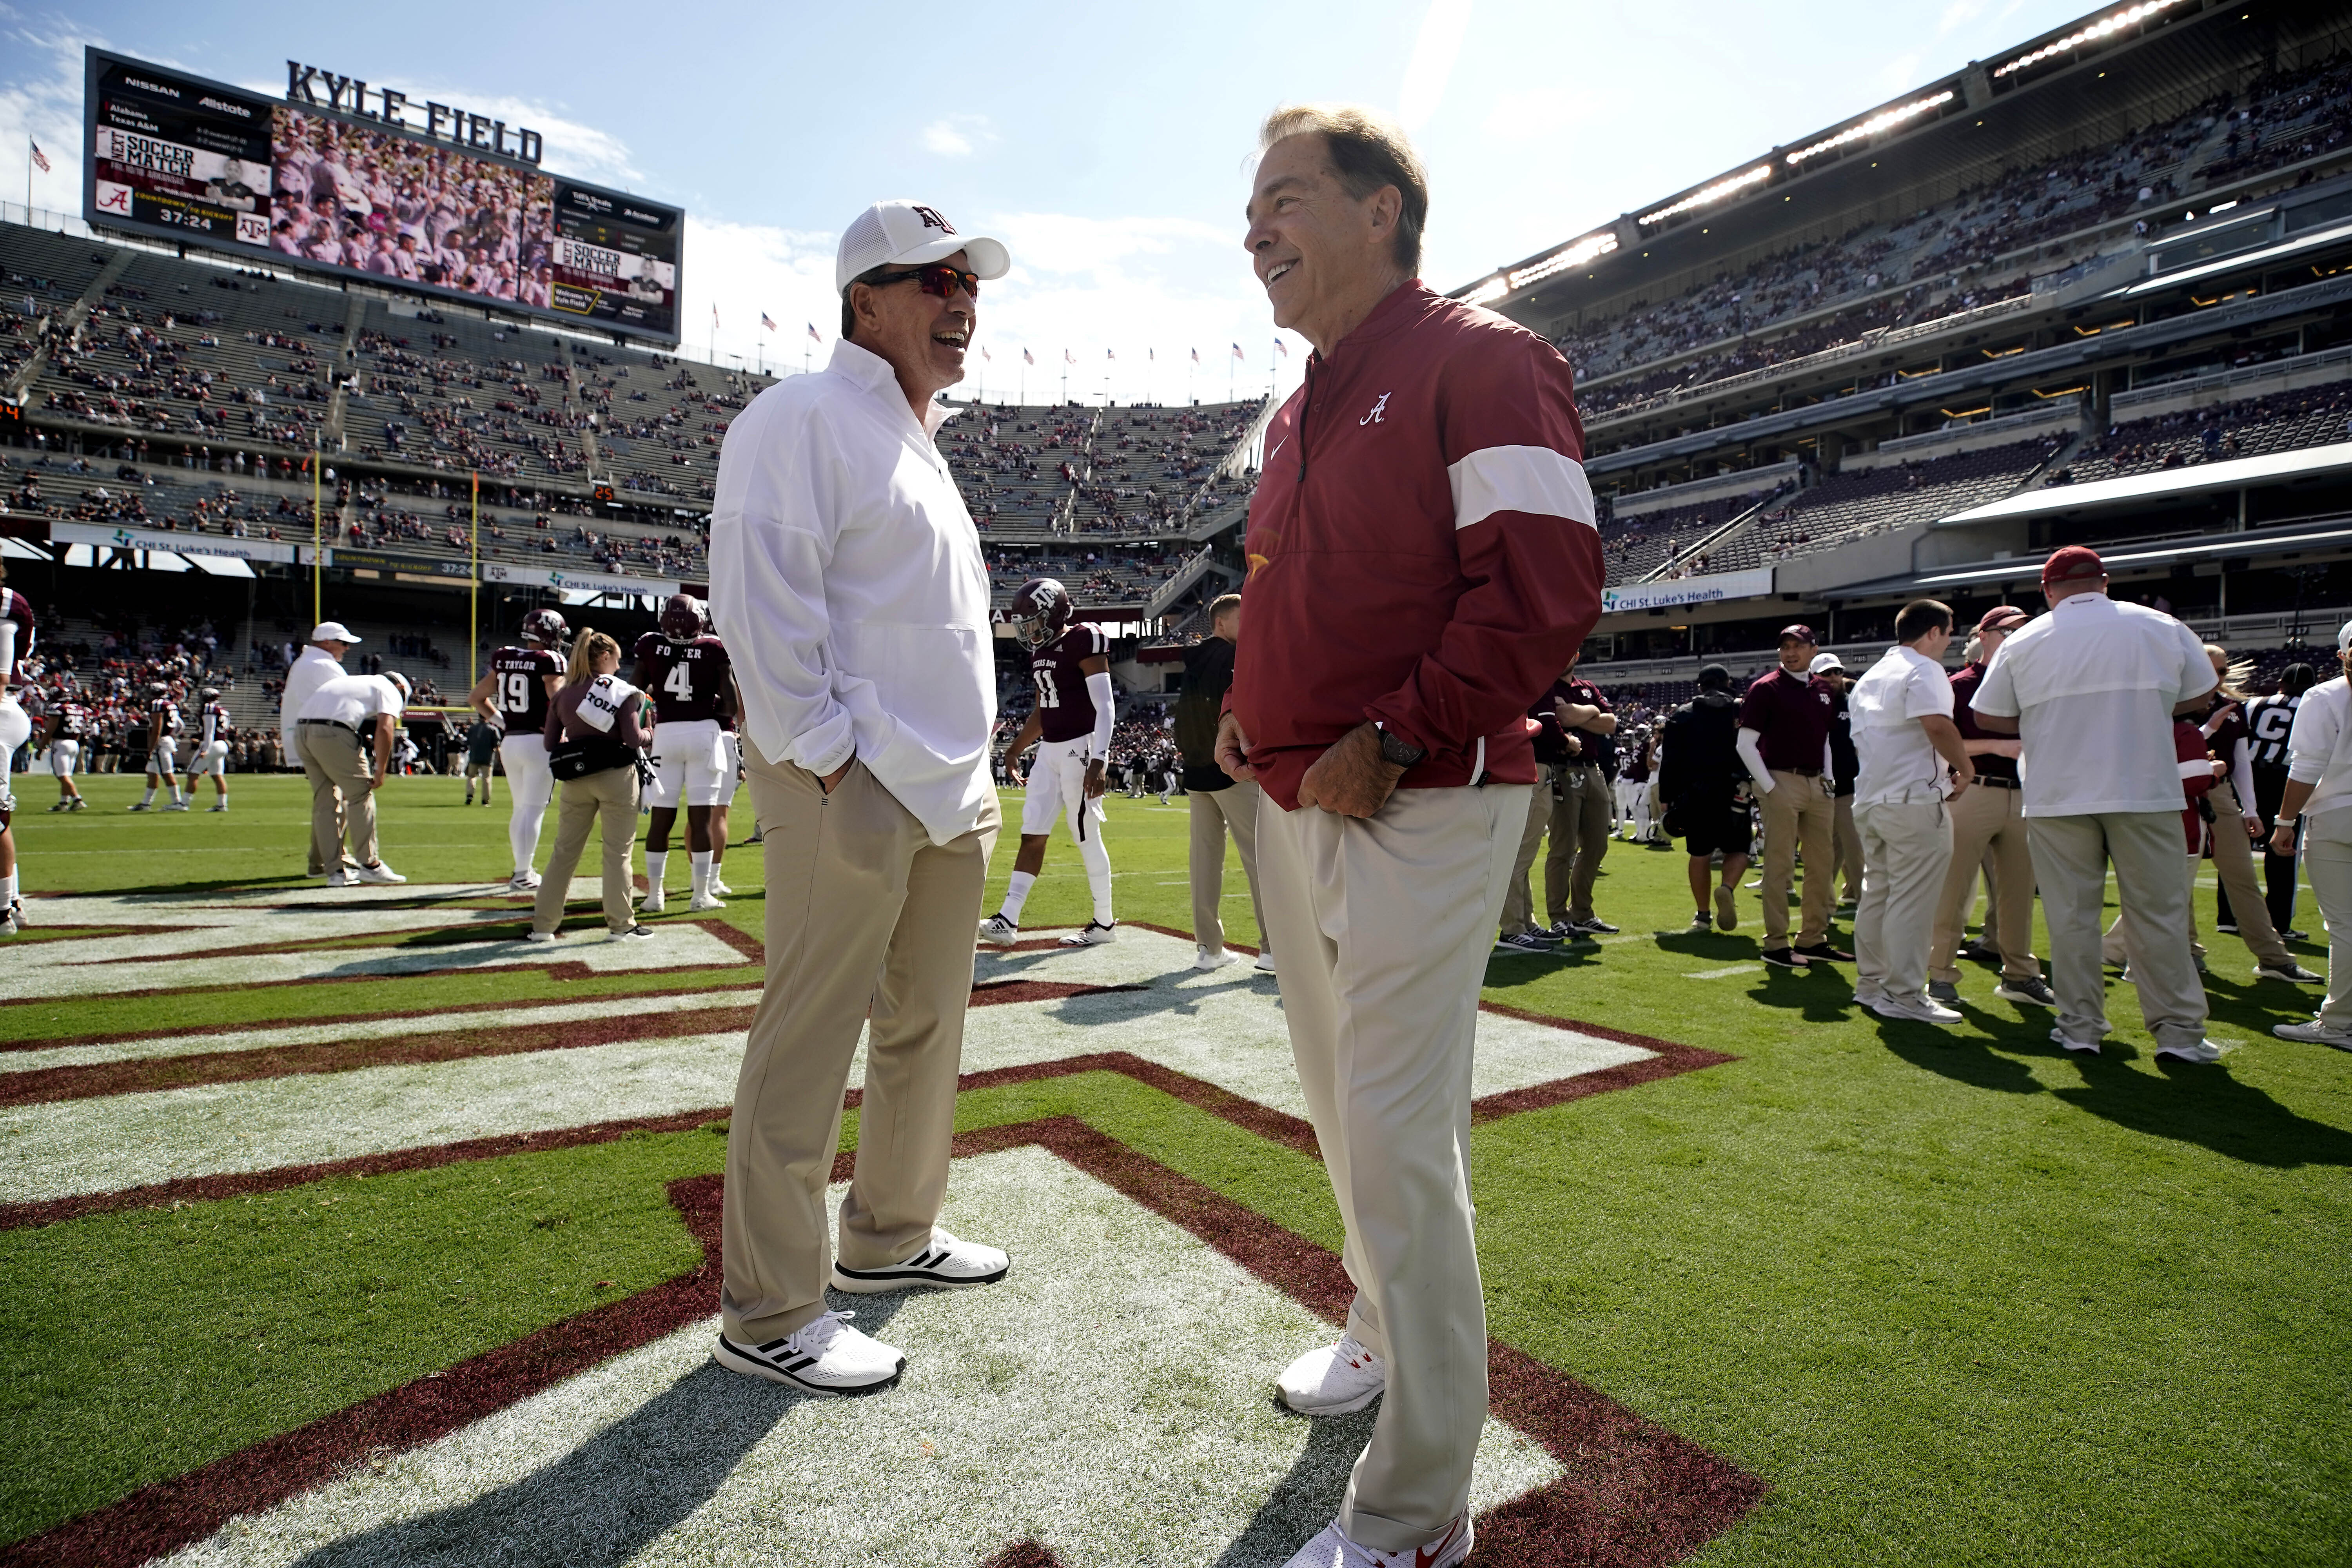 SEC issues public reprimand to both Texas A&M football coach Jimbo Fisher  and Alabama football coach Nick Saban